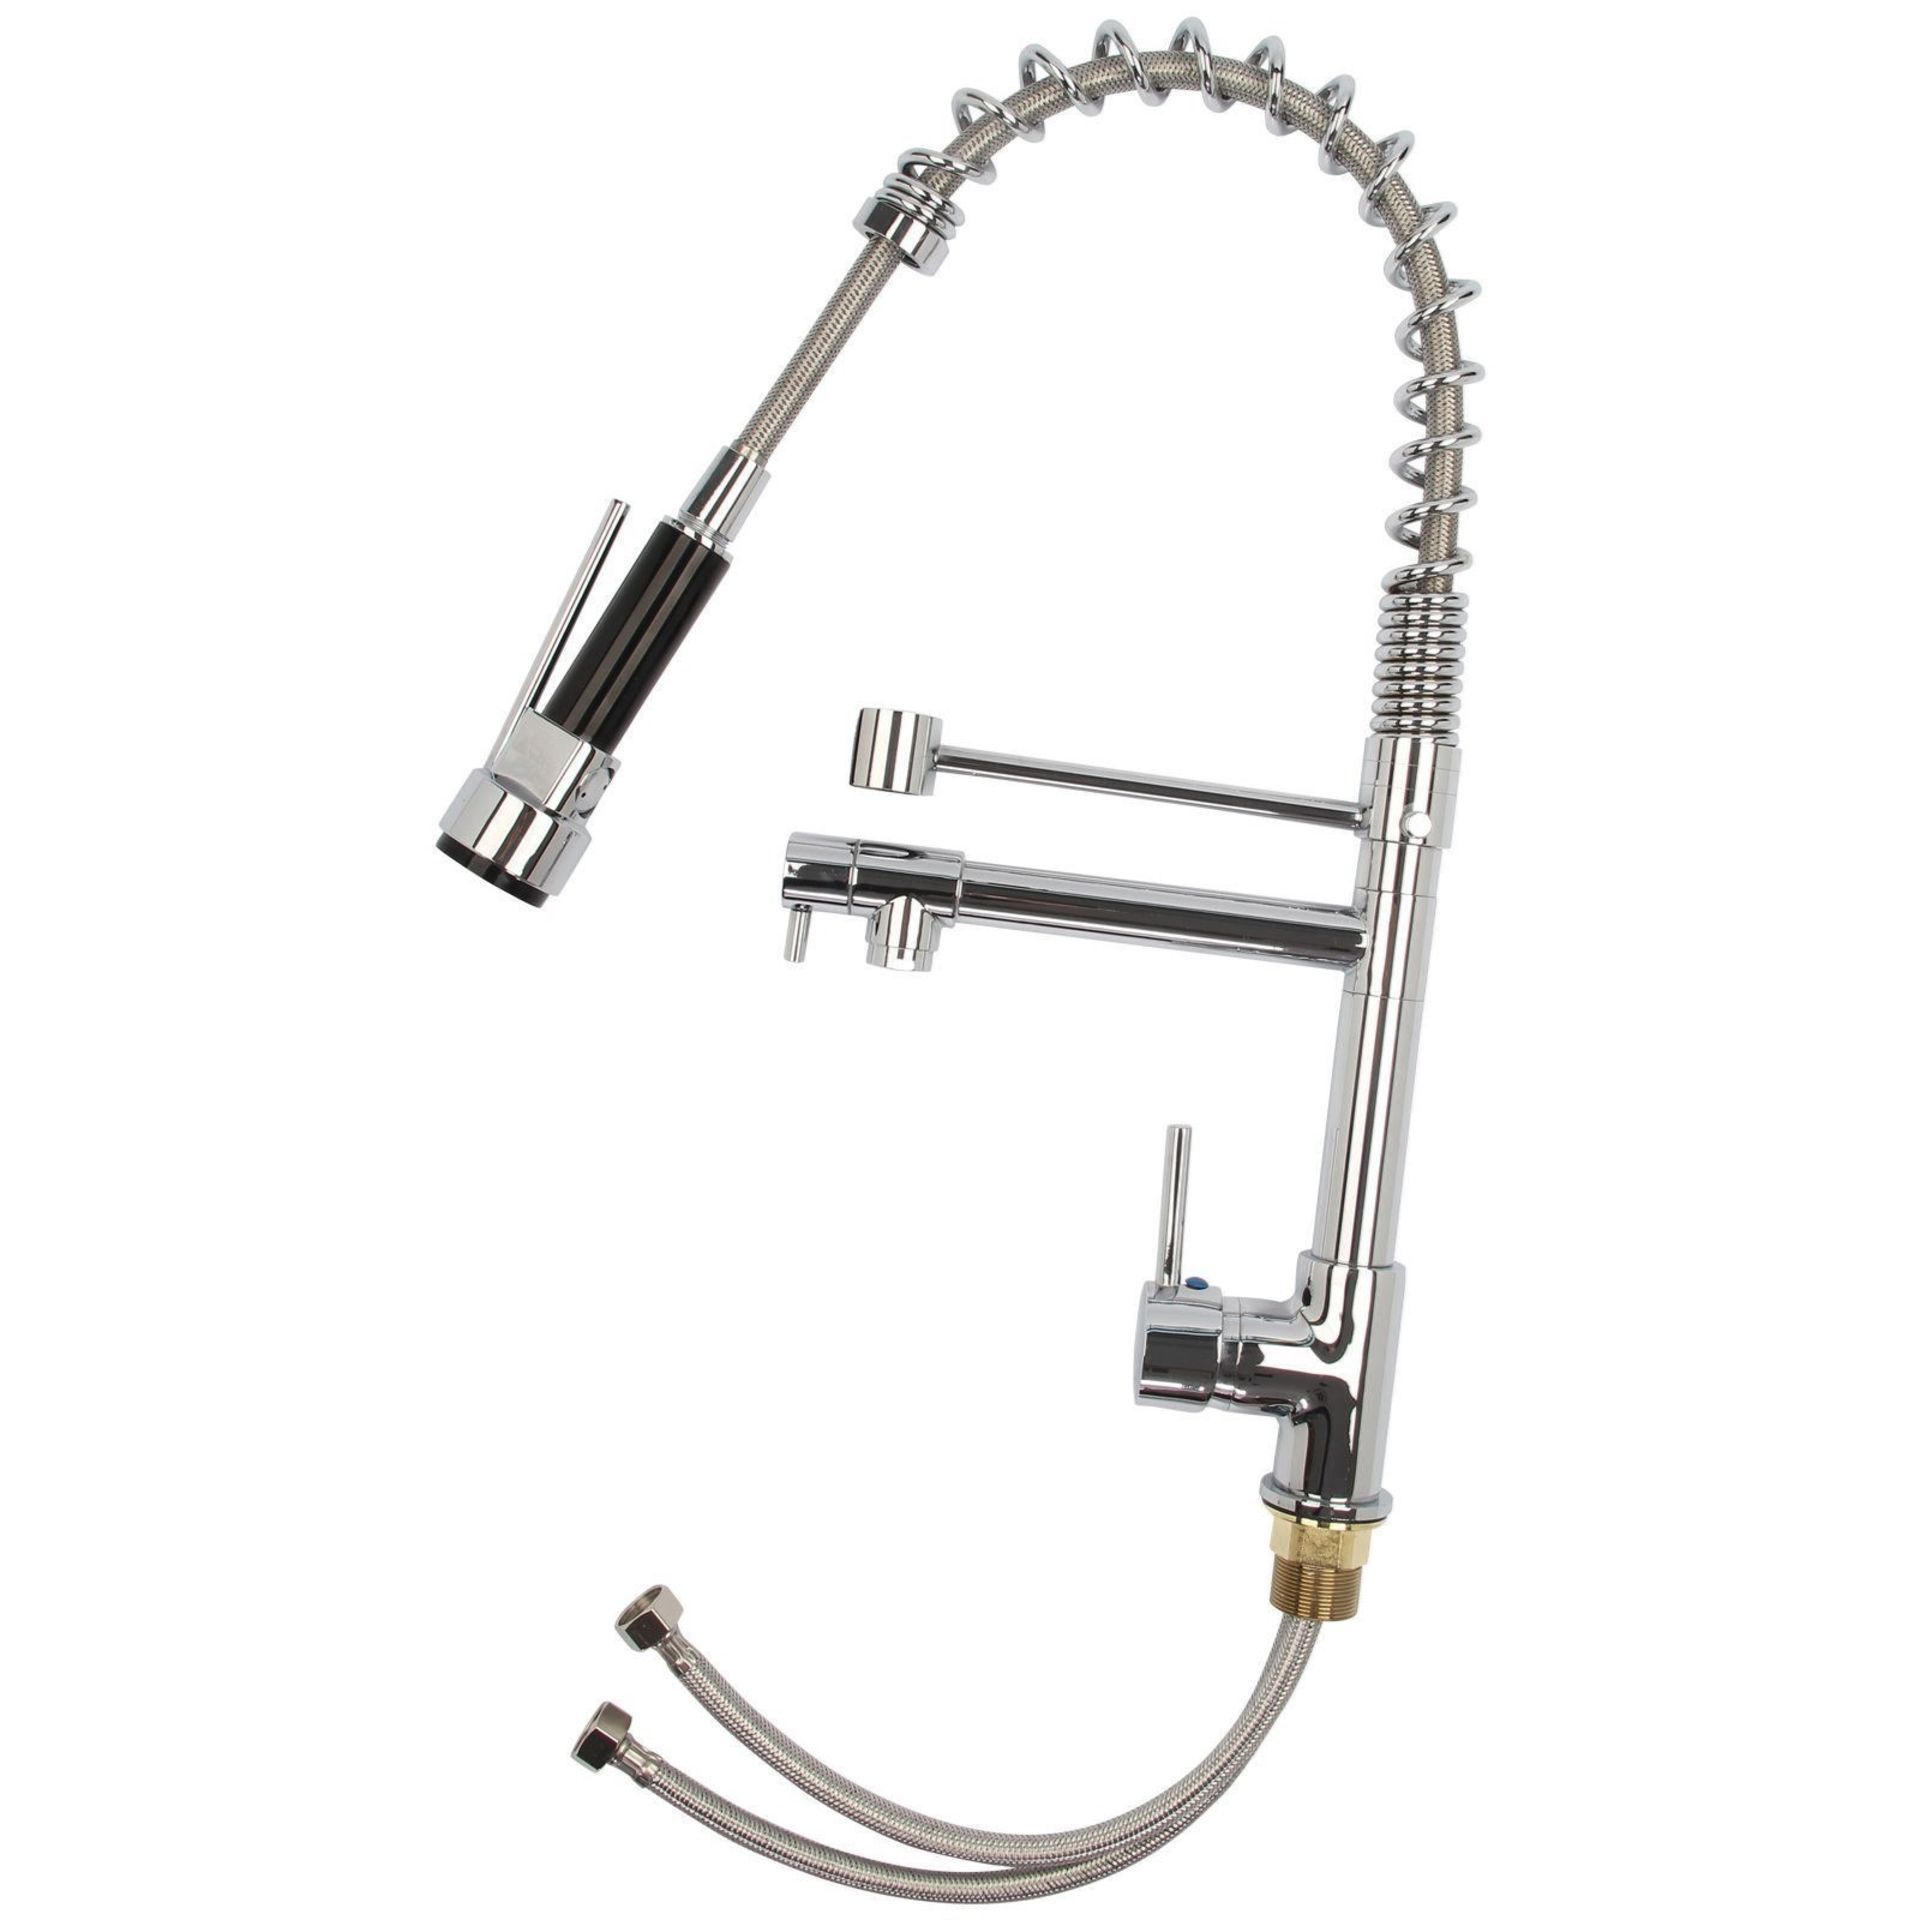 New & Boxed Bentley Modern Monobloc Chrome Brass Pull Out Spray Mixer Tap.RRP £349.99.This Tap Is - Image 2 of 2